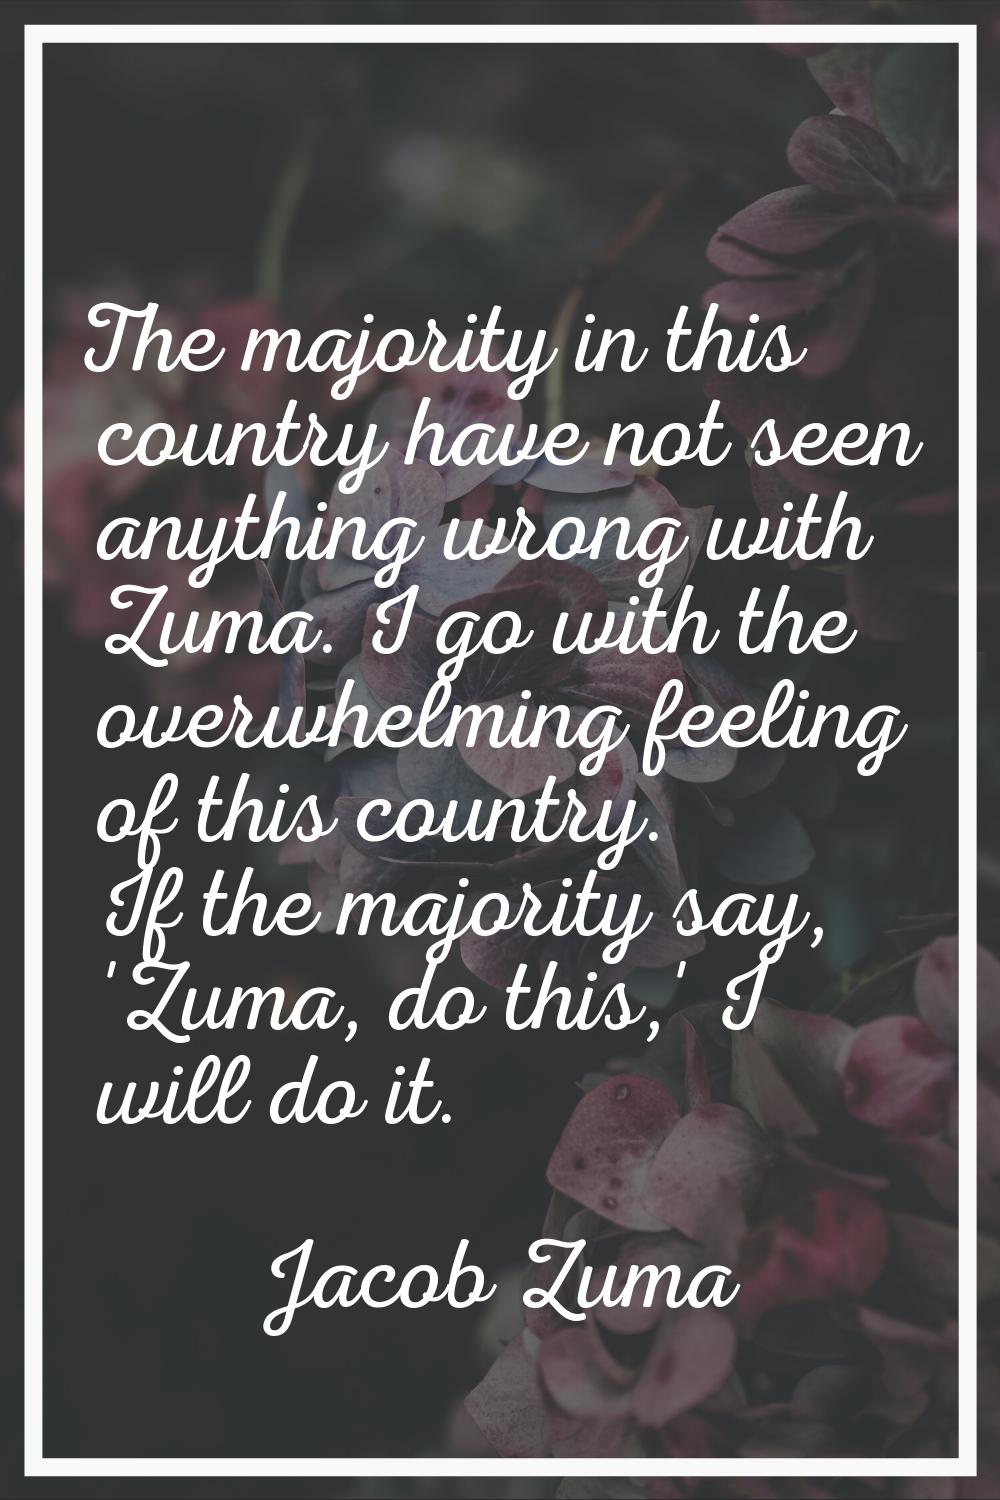 The majority in this country have not seen anything wrong with Zuma. I go with the overwhelming fee